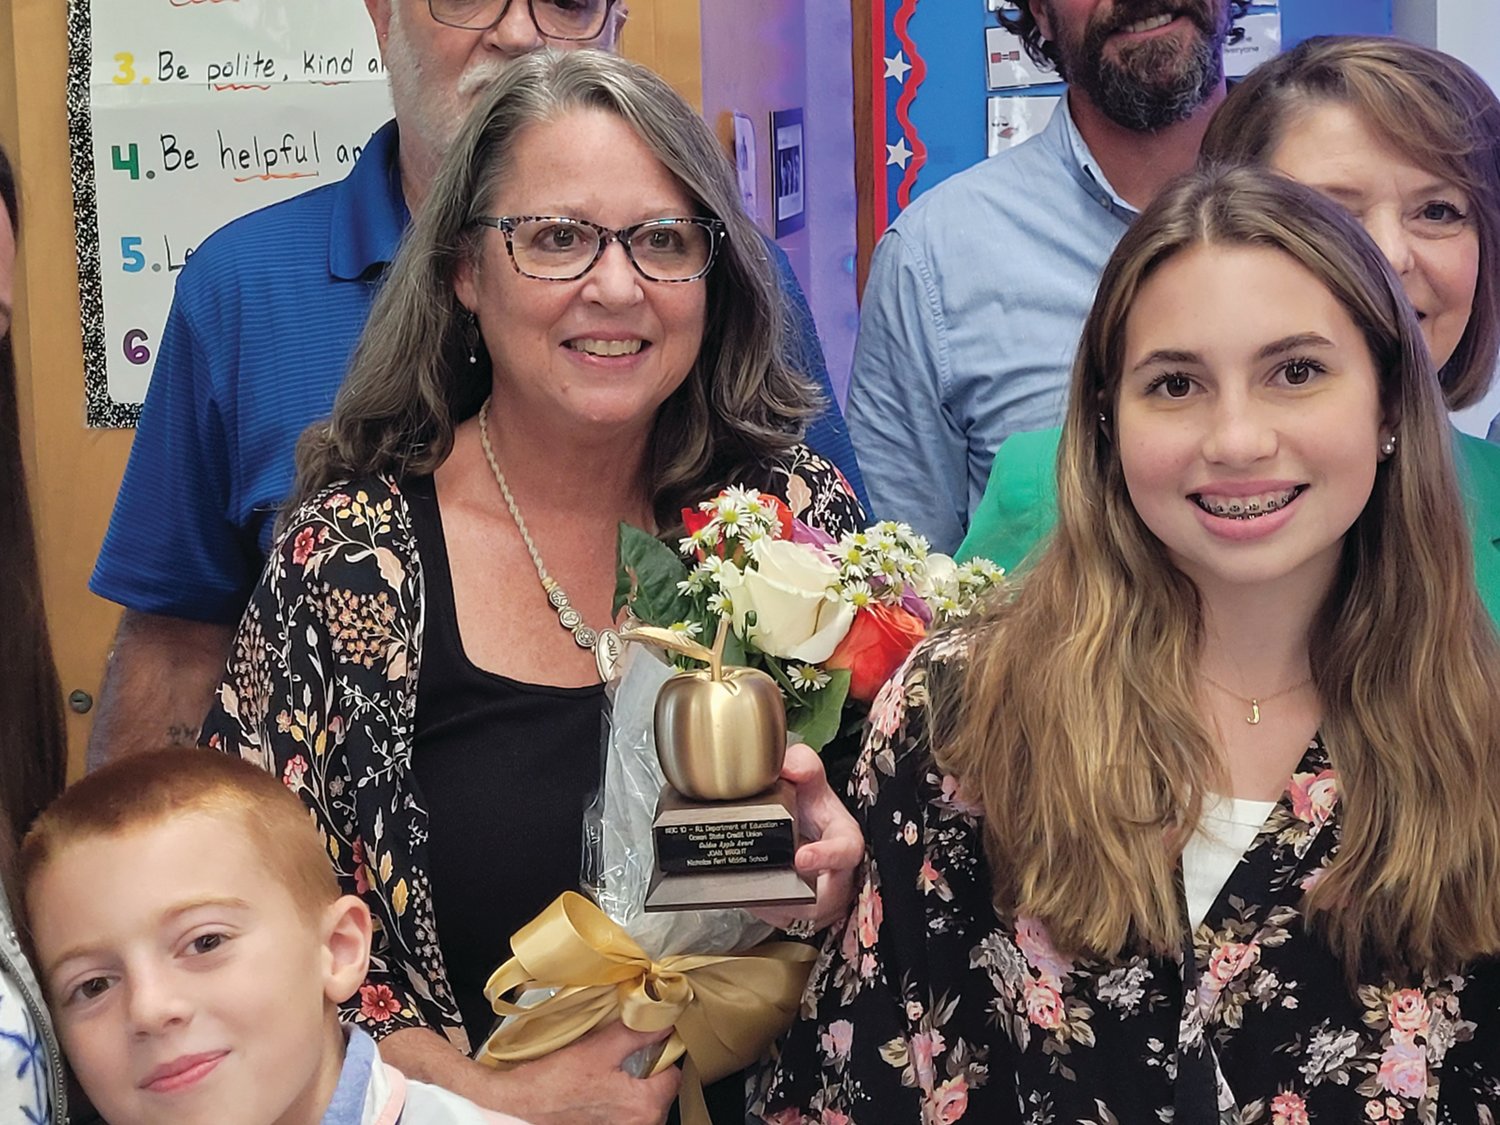 AN INSPIRATION: Nicholas A. Ferri Middle School Teacher Joan Wright held her “Golden Apple” close to her heart after the award ceremony last week.